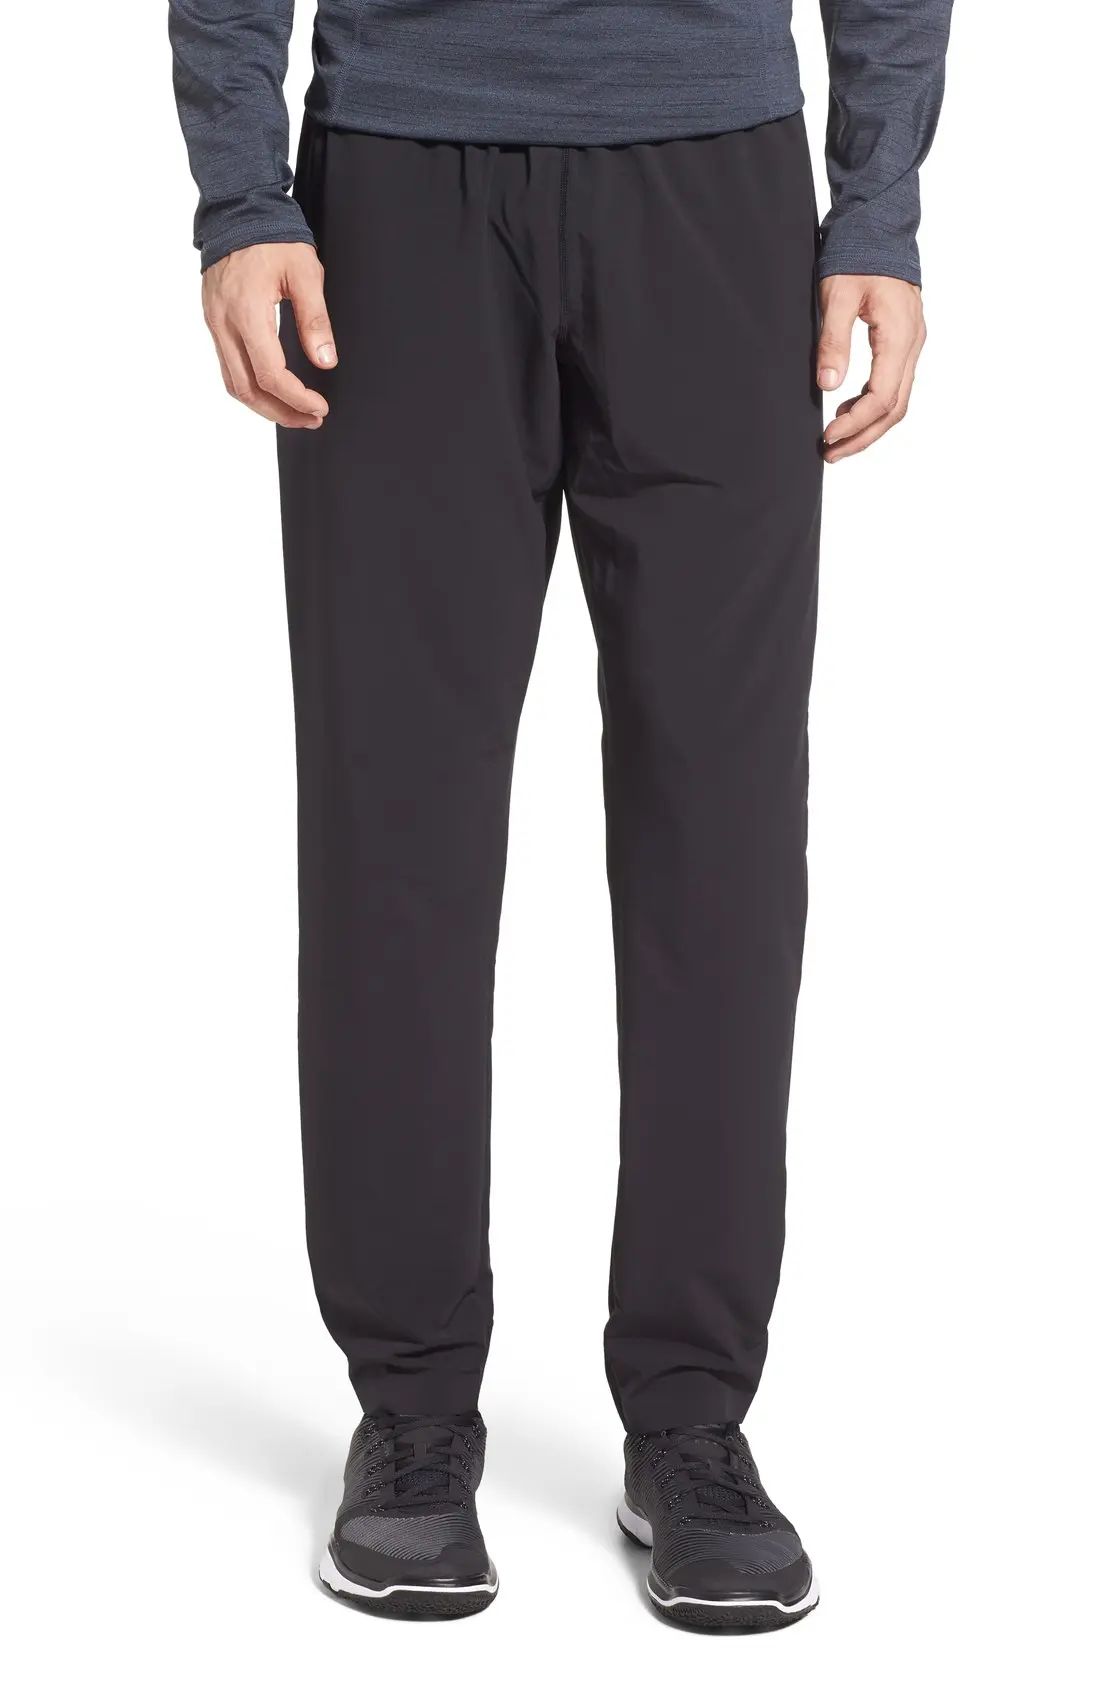 'Graphite' Tapered Athletic Pants | Nordstrom